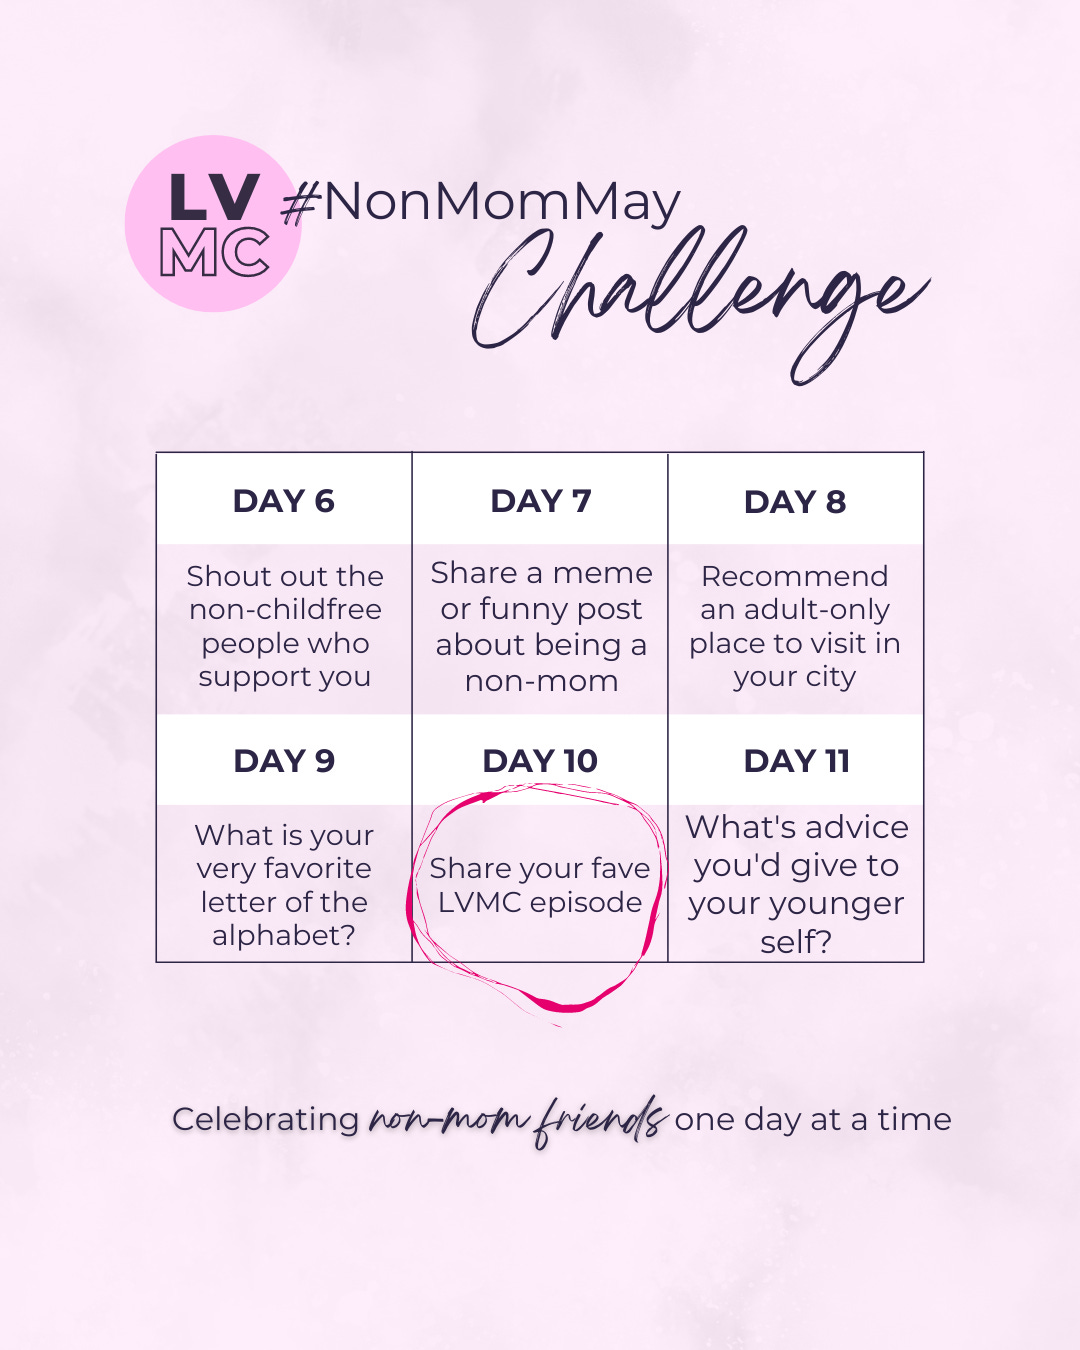 LVMC #NonMomMay Challenge with 6 new prompts